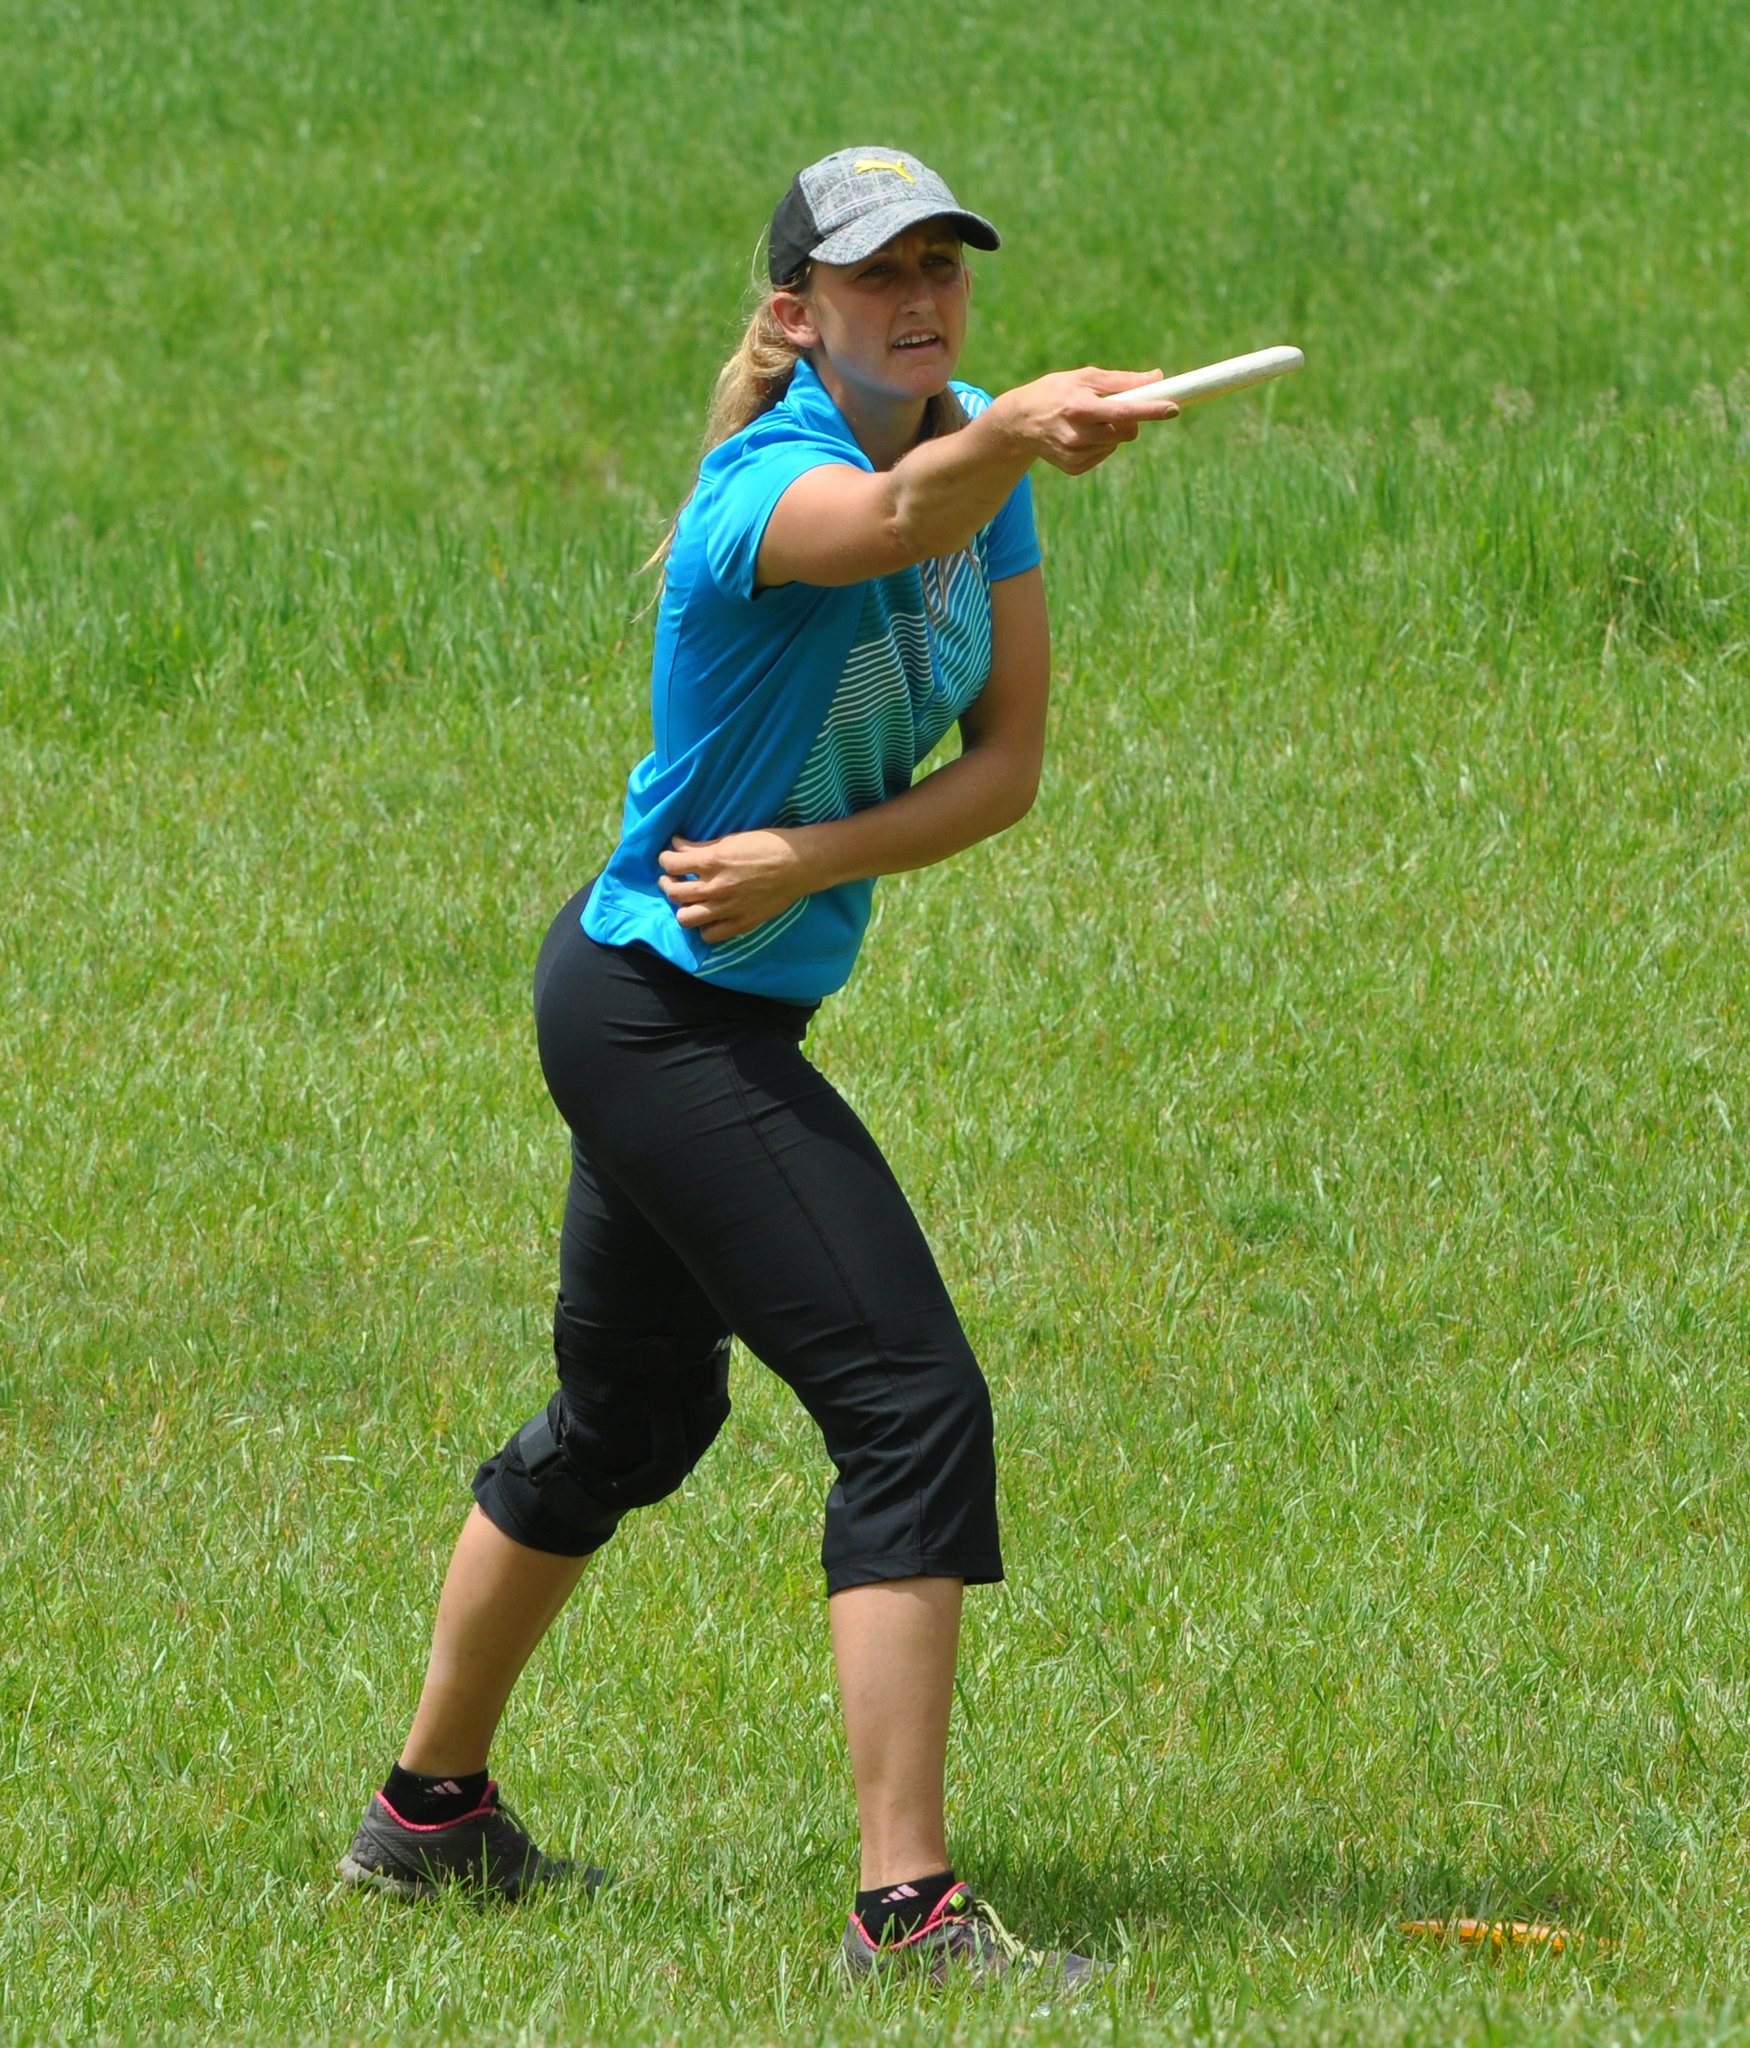 How to Watch the DGPT Great Lakes Open Professional Disc Golf